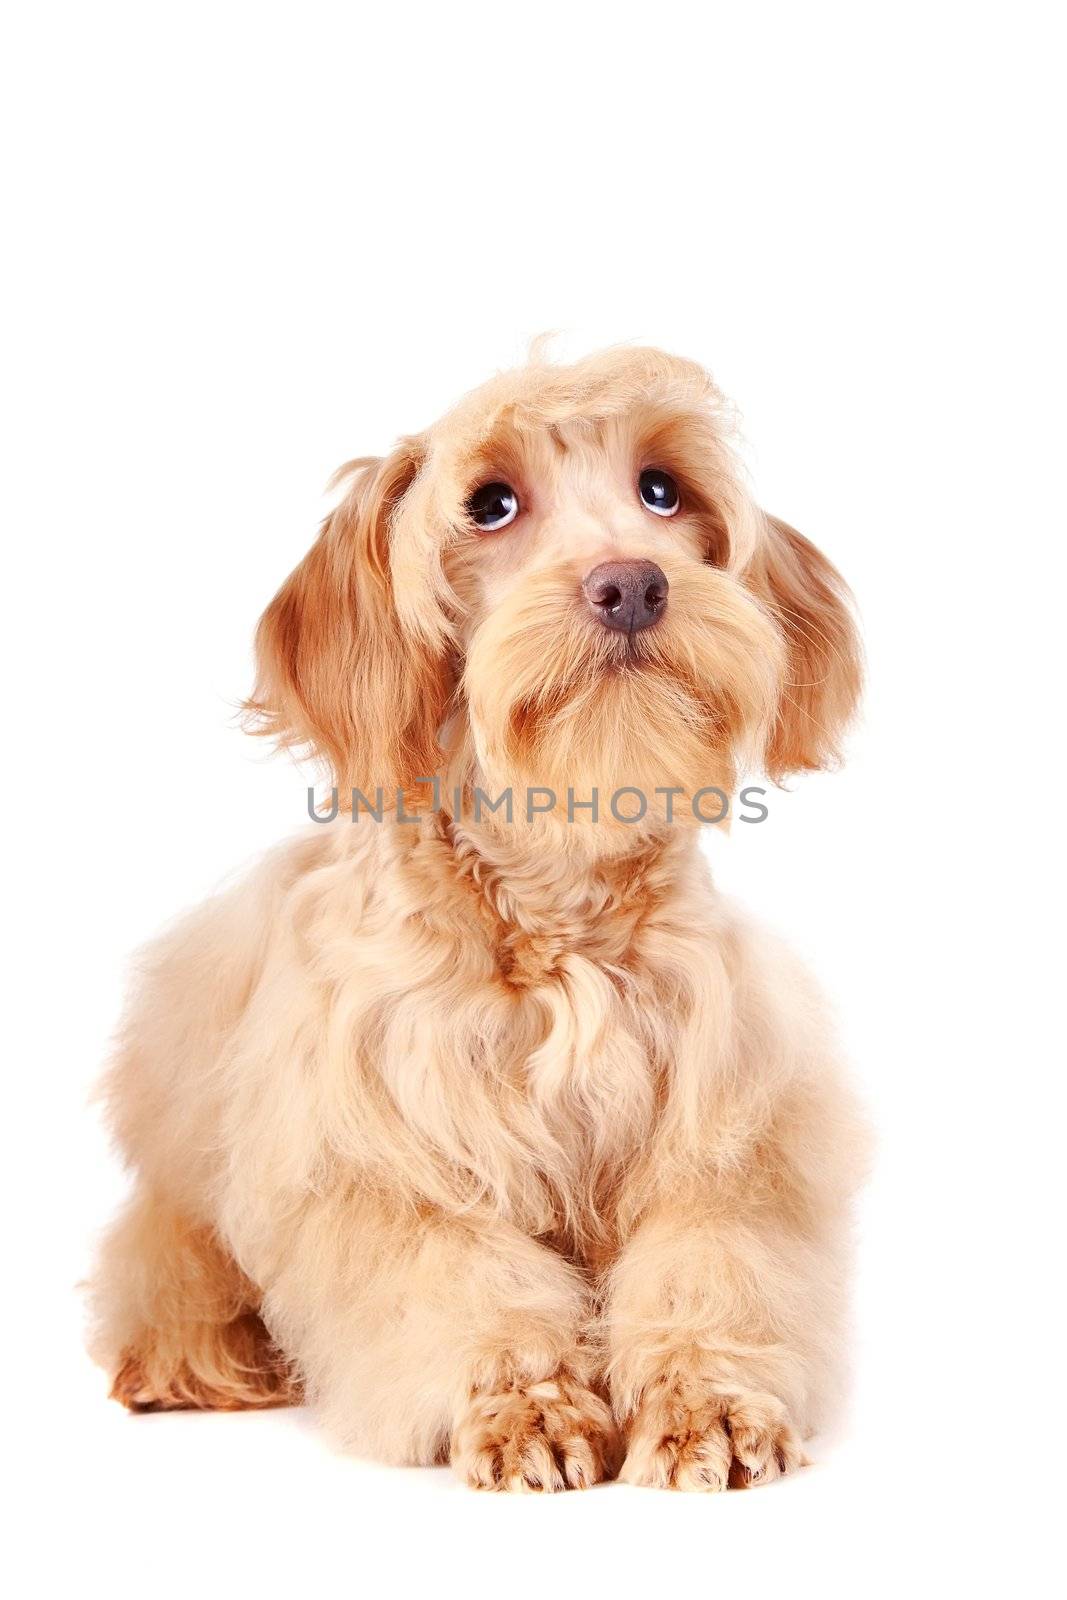 Decorative dog. Puppy of the Petersburg orchid on a white background